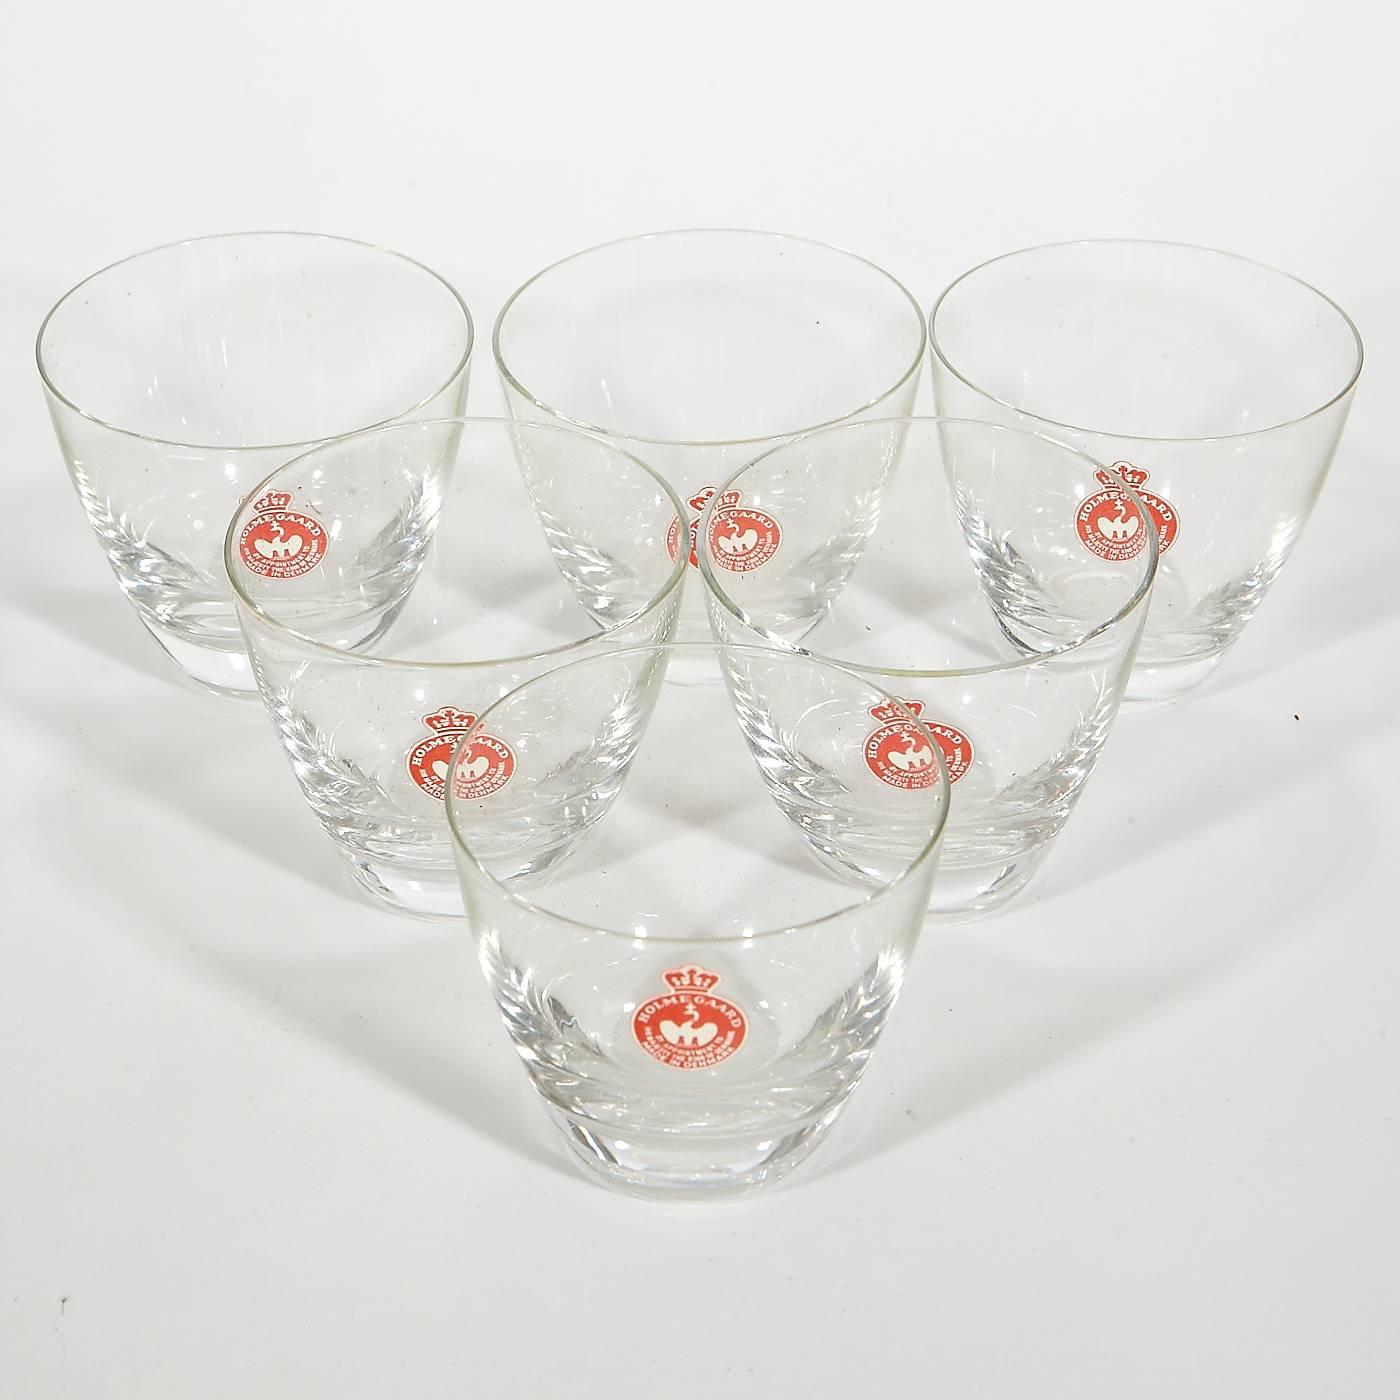 Vintage Holmegaard of Denmark, 1960s set of six glass smoked 4oz cocktail tumblers in the original box and in unused condition. The set includes the box.